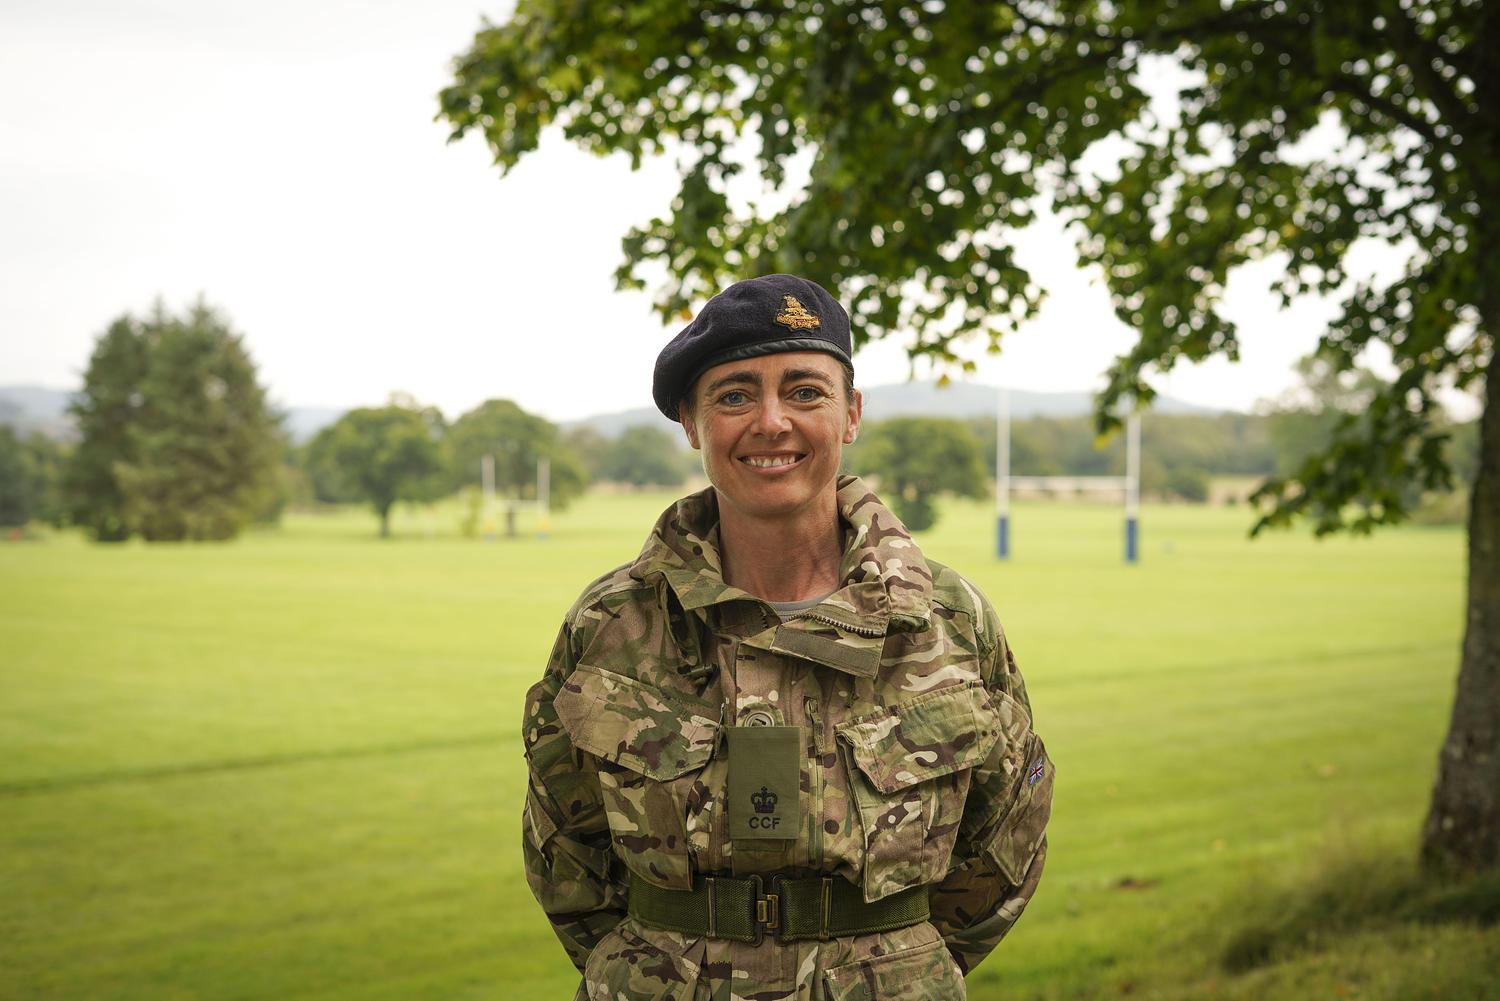 Introducing our new CCF Contingent Commander